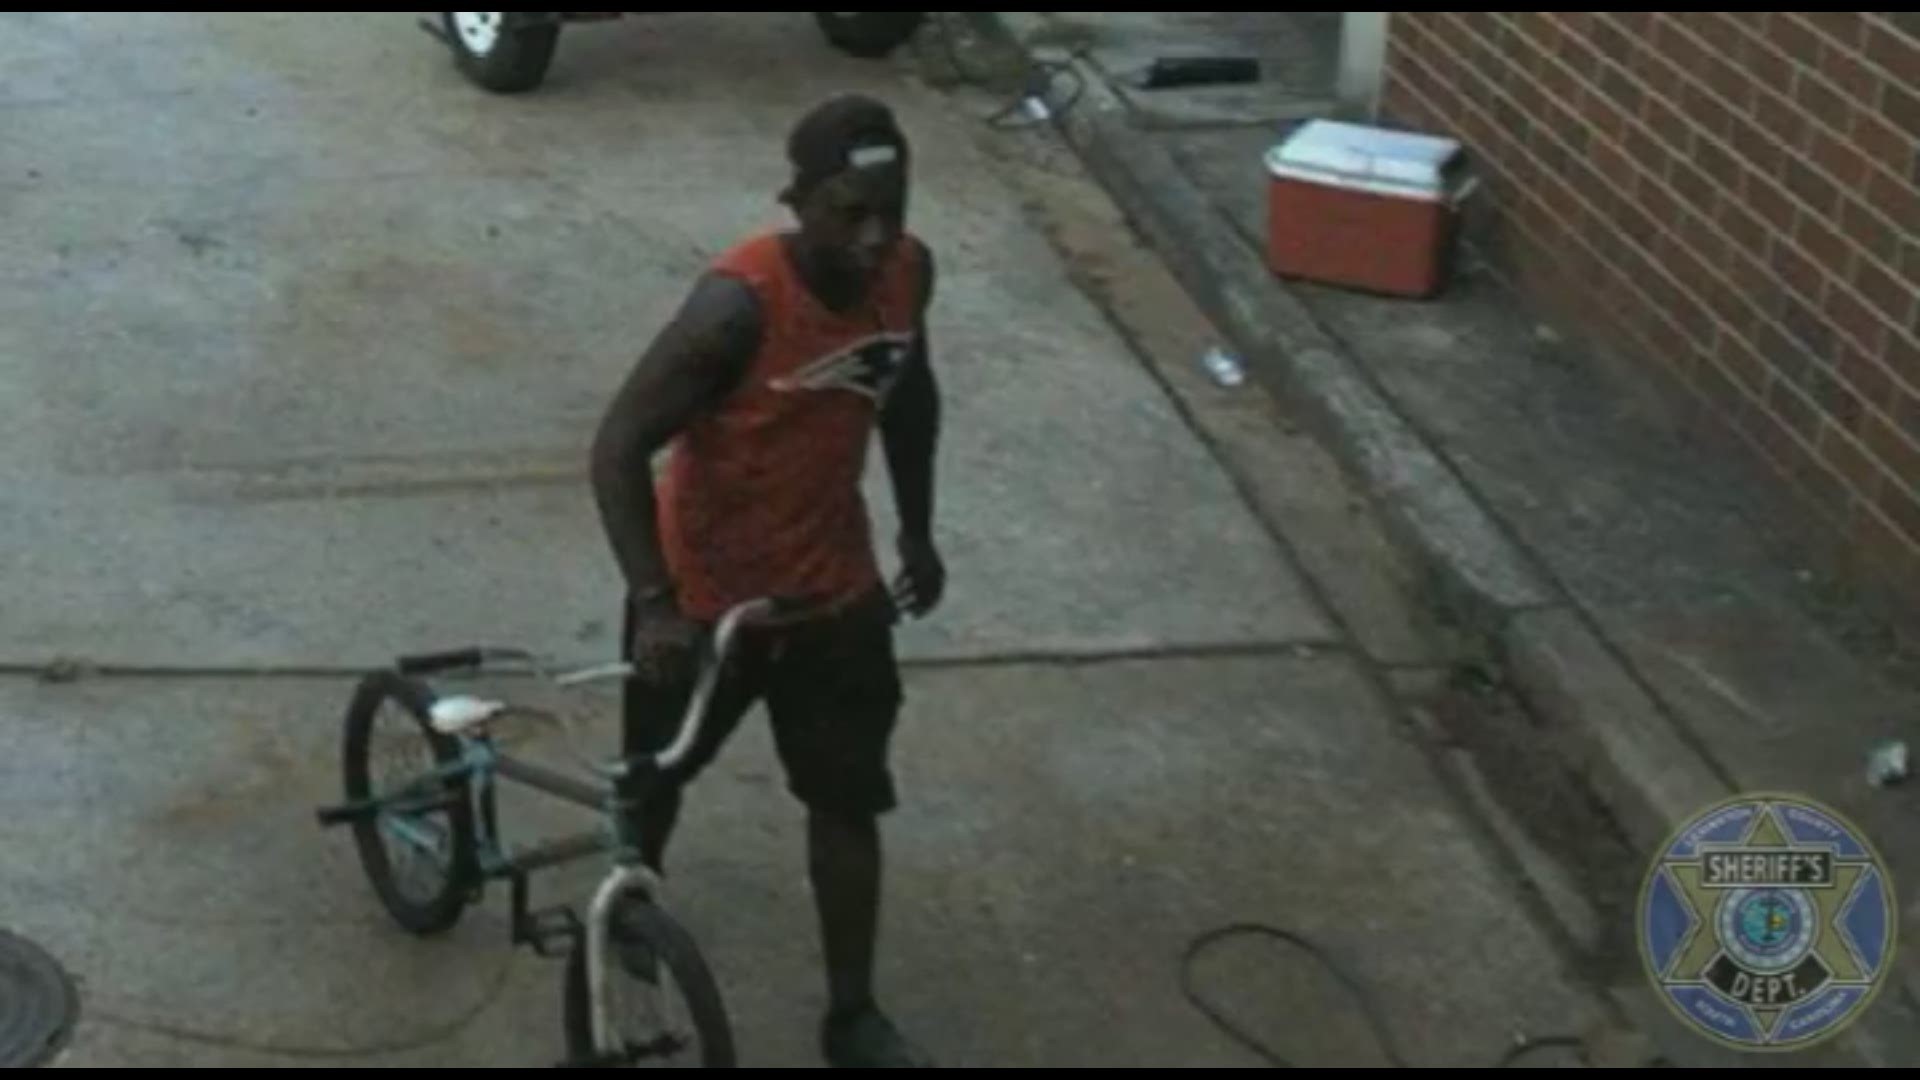 In surveillance video, a man can be seen riding his bike and stopping at Red Bank Elementary School on July 26.